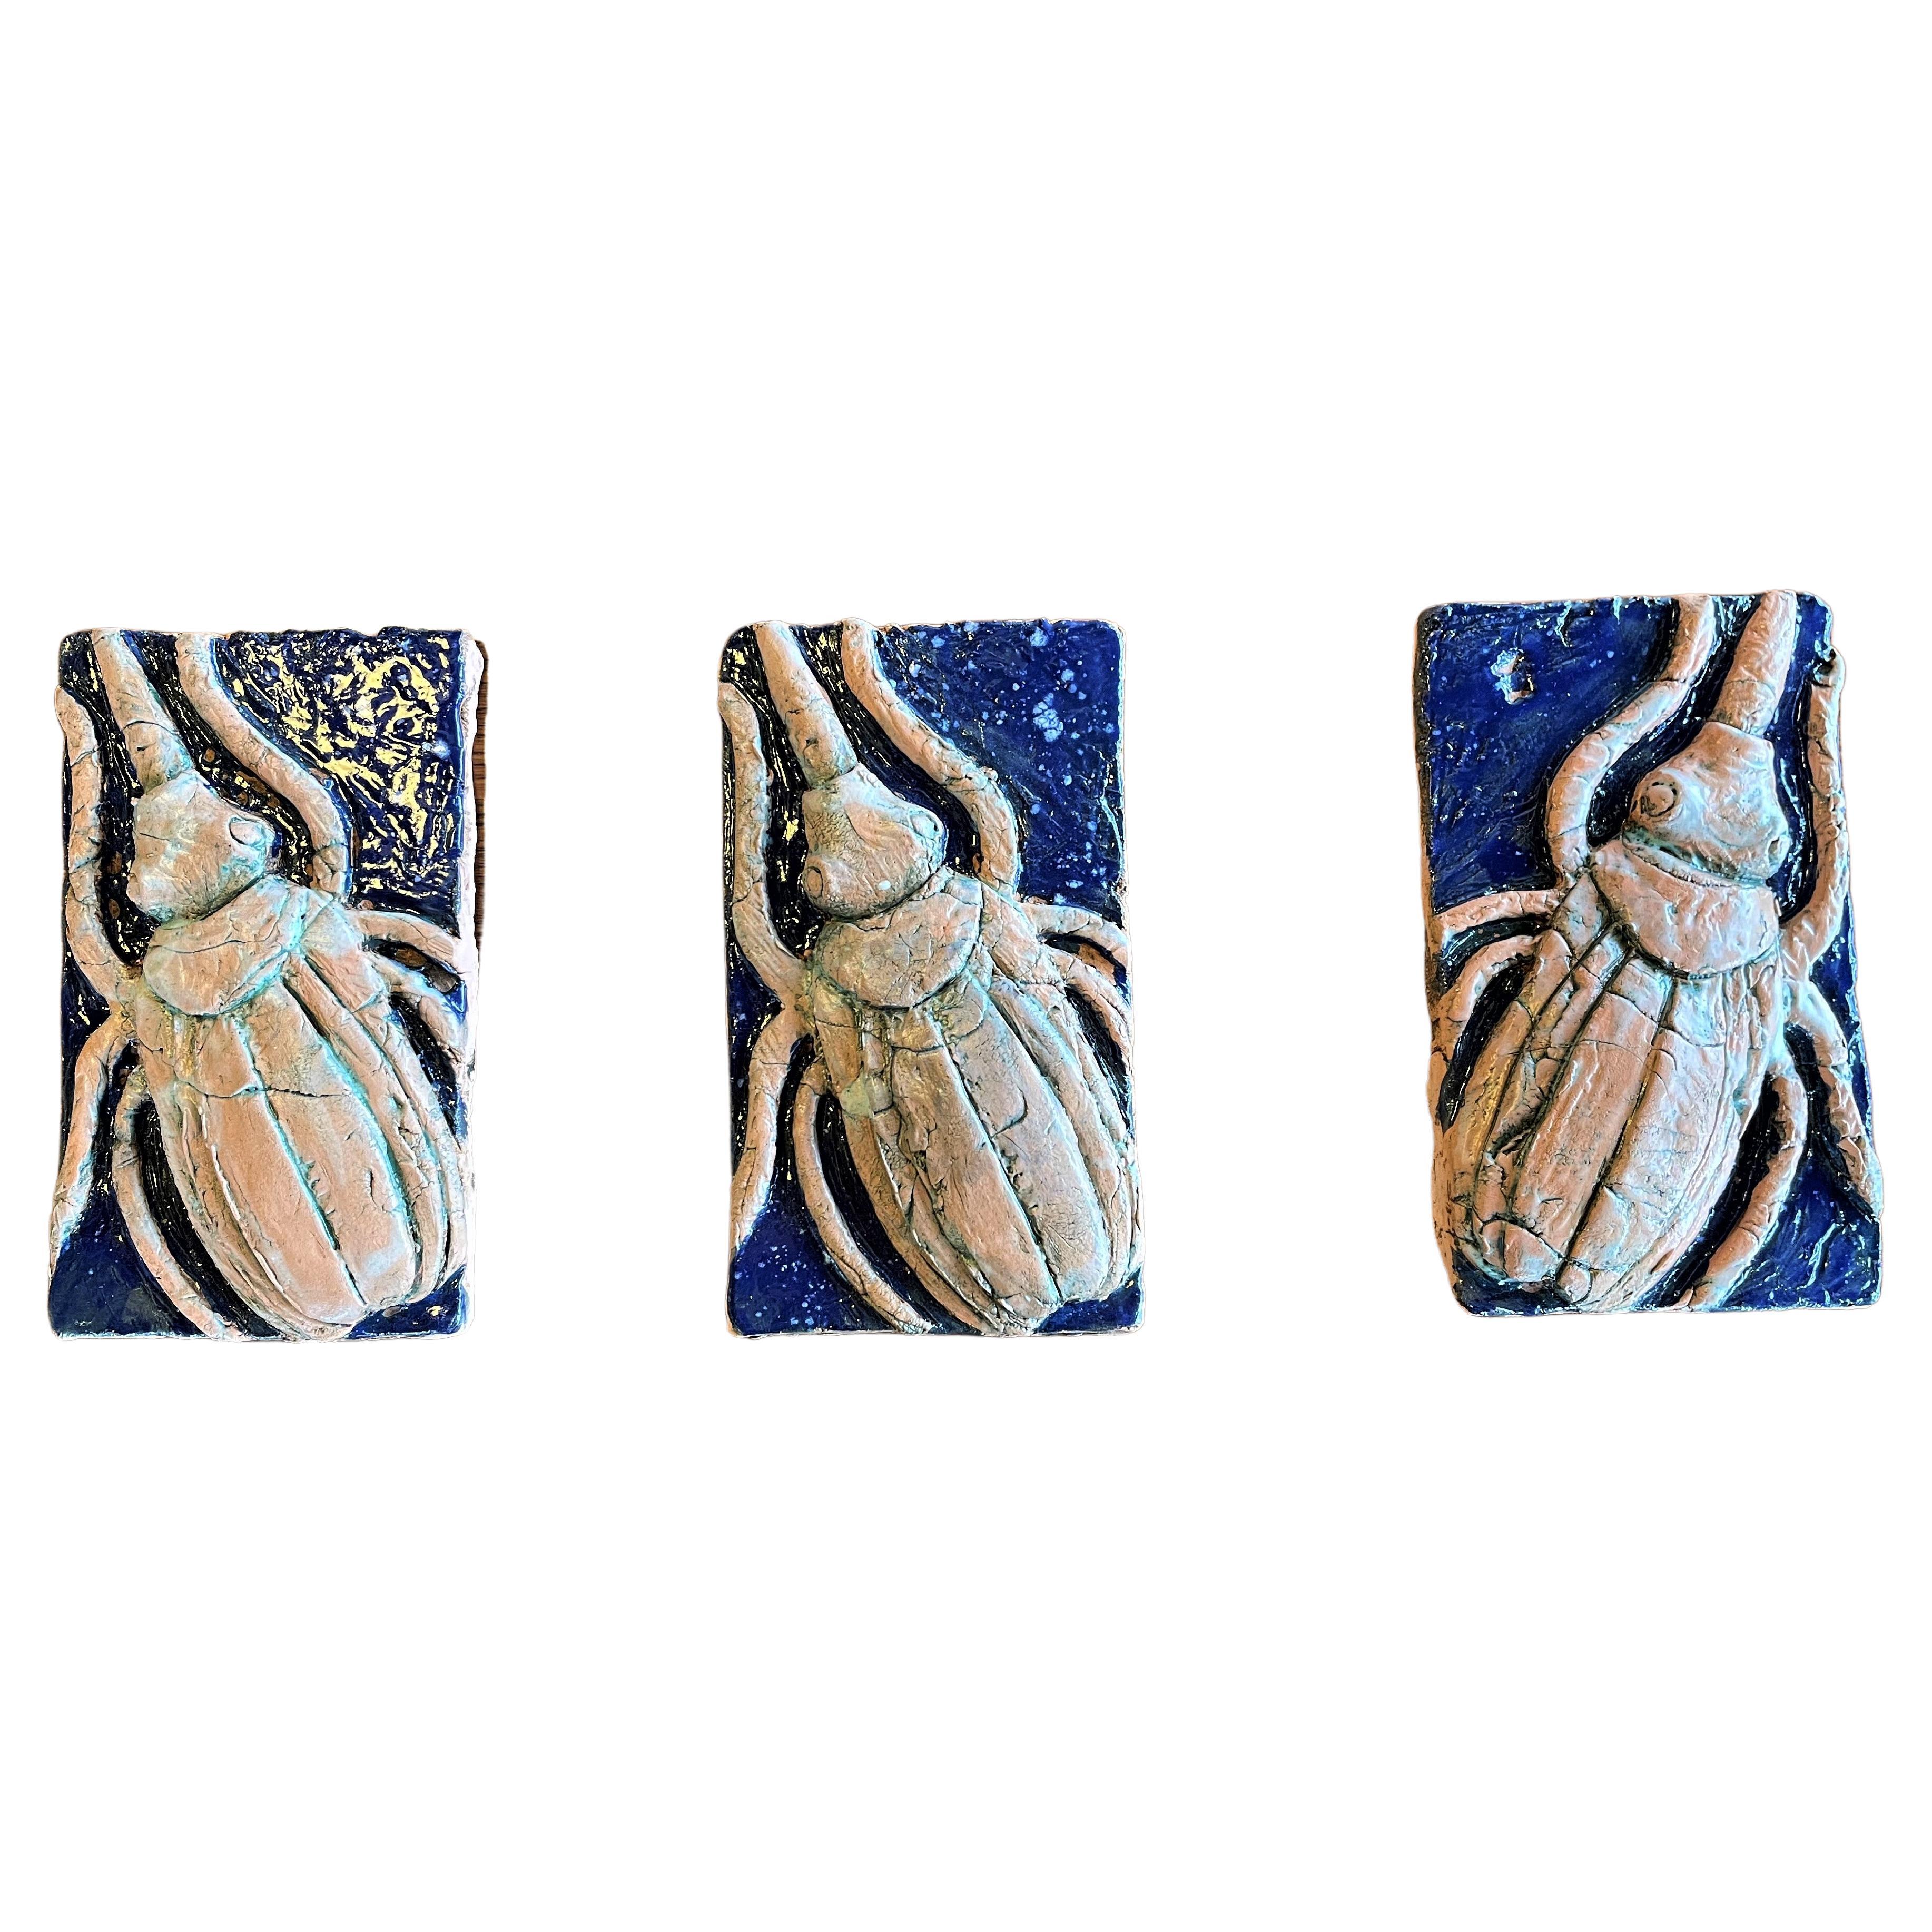 Custom Scarab Wall Tiles: Artist-Crafted and Hand Glazed Ceramic - Set of 3 For Sale